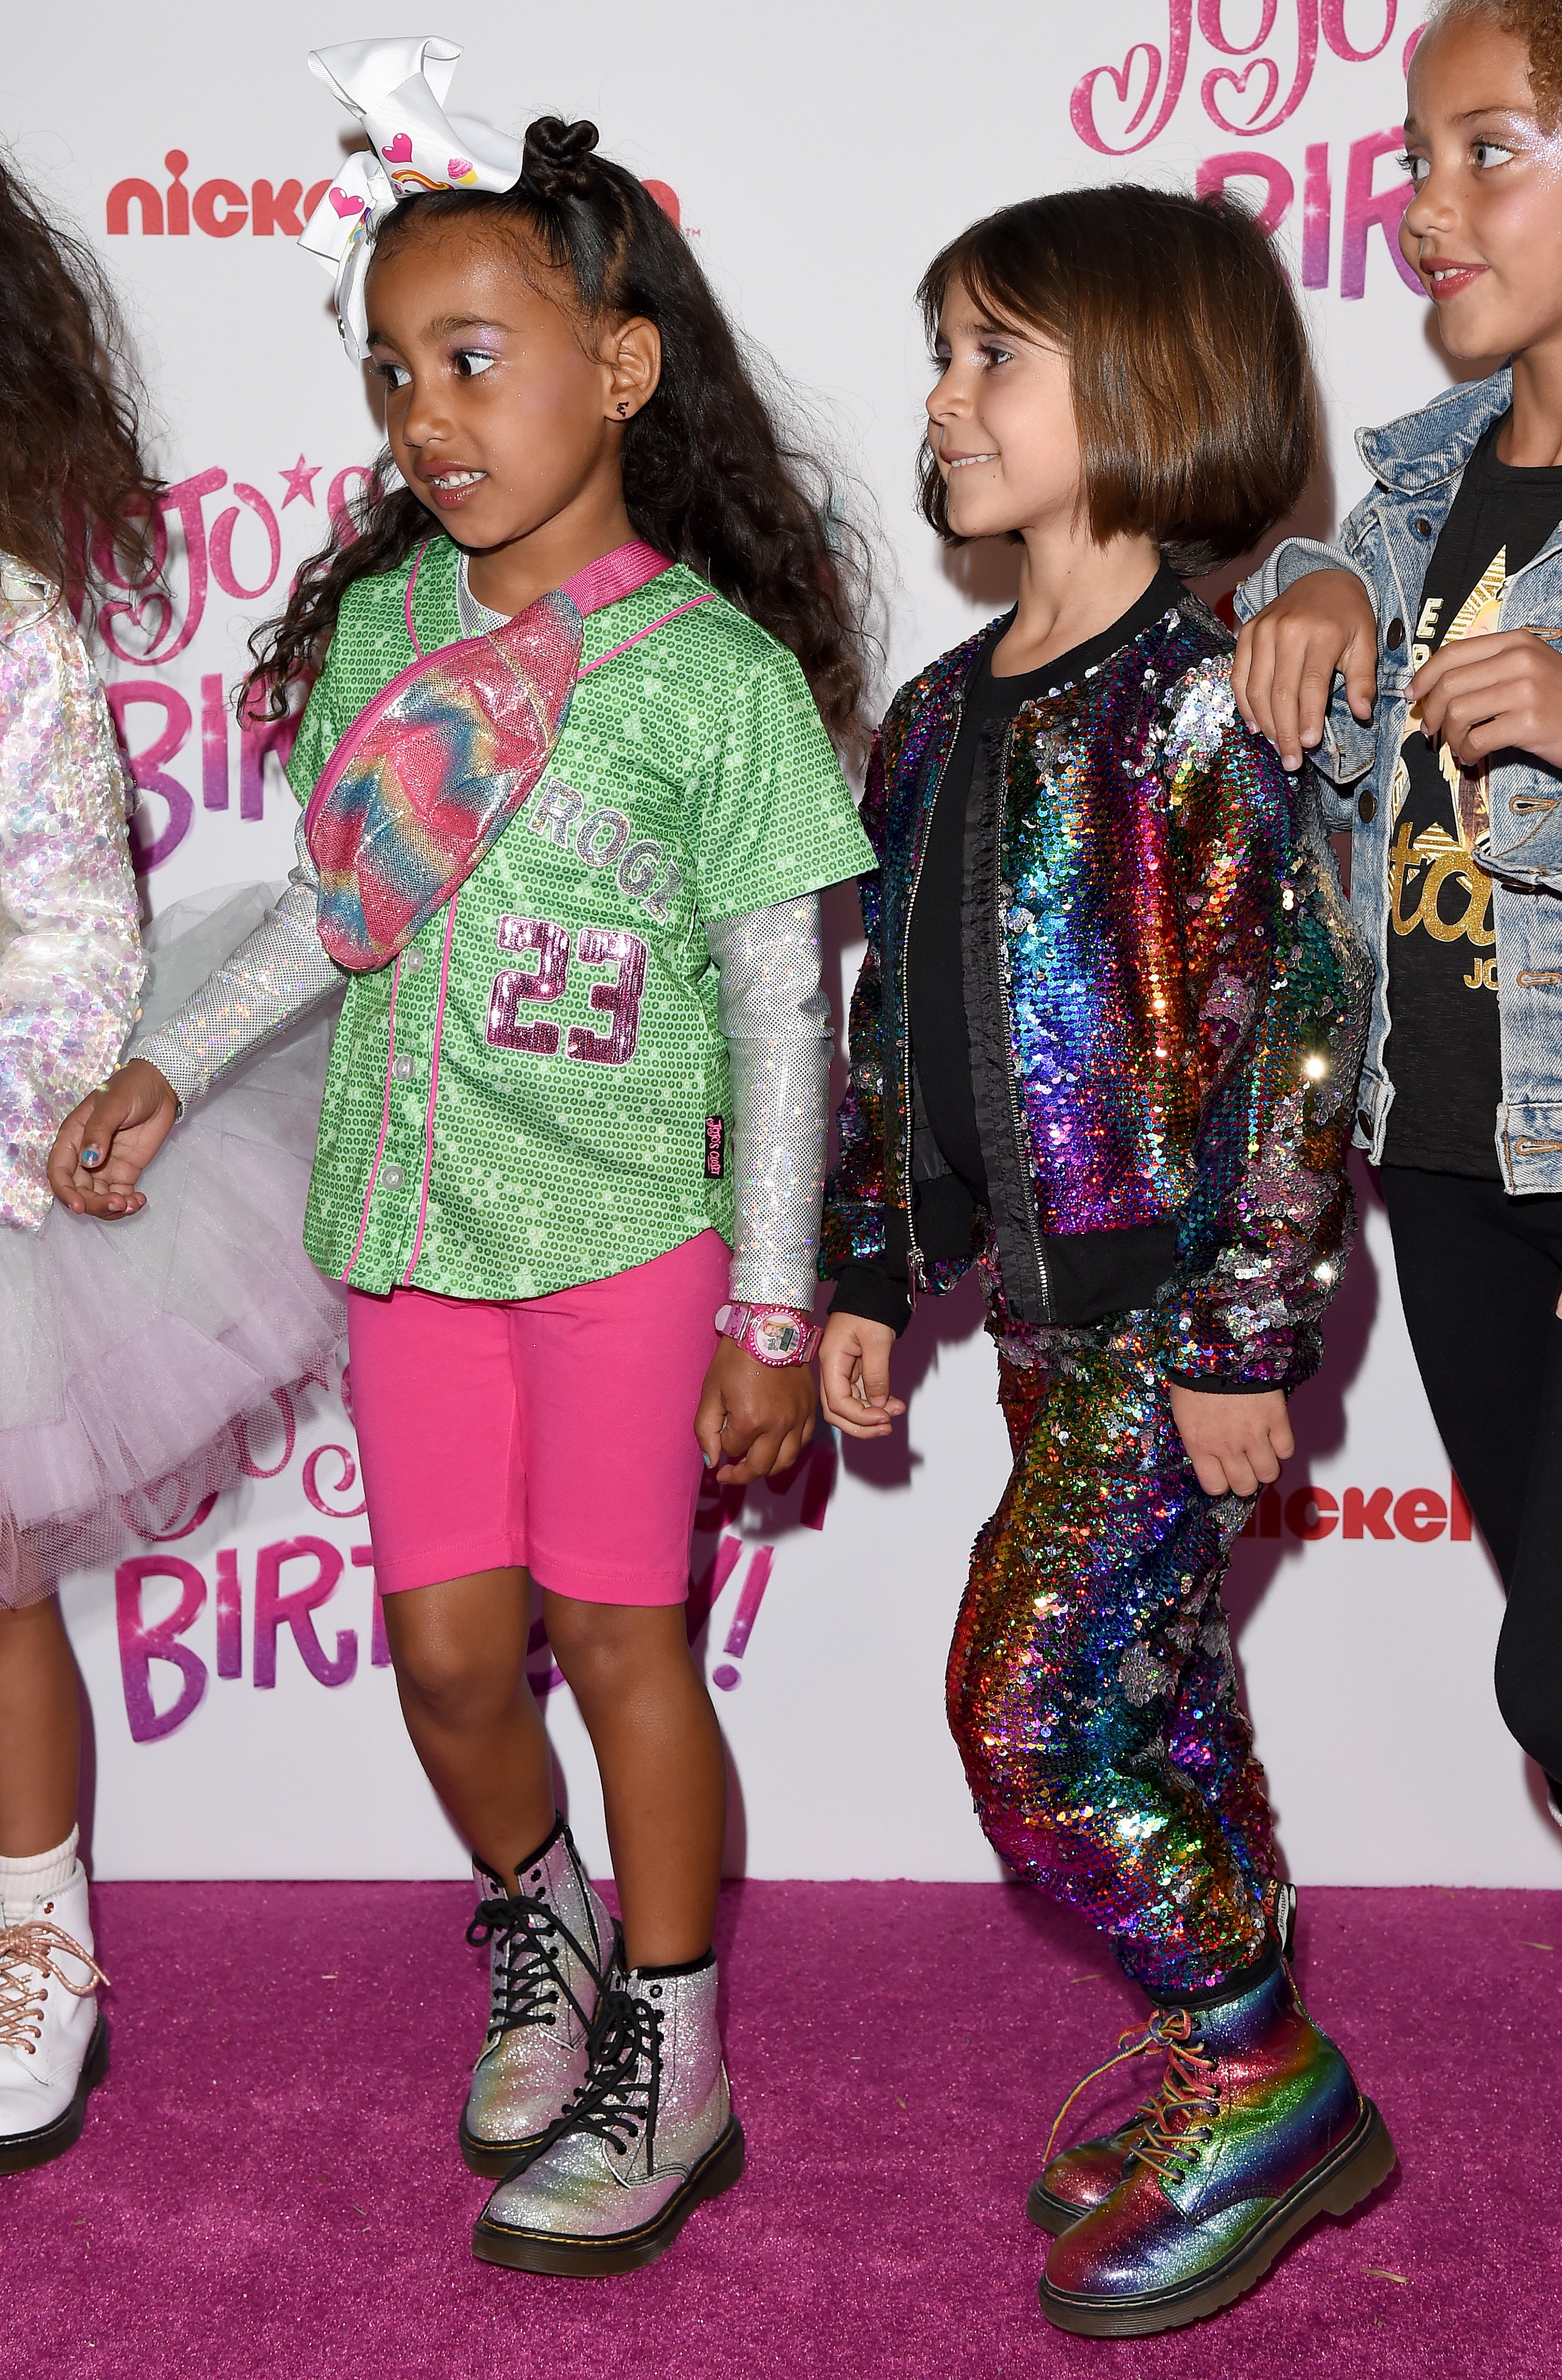 North West And Penelope Disick Pose On The Red Carpet At Jojo